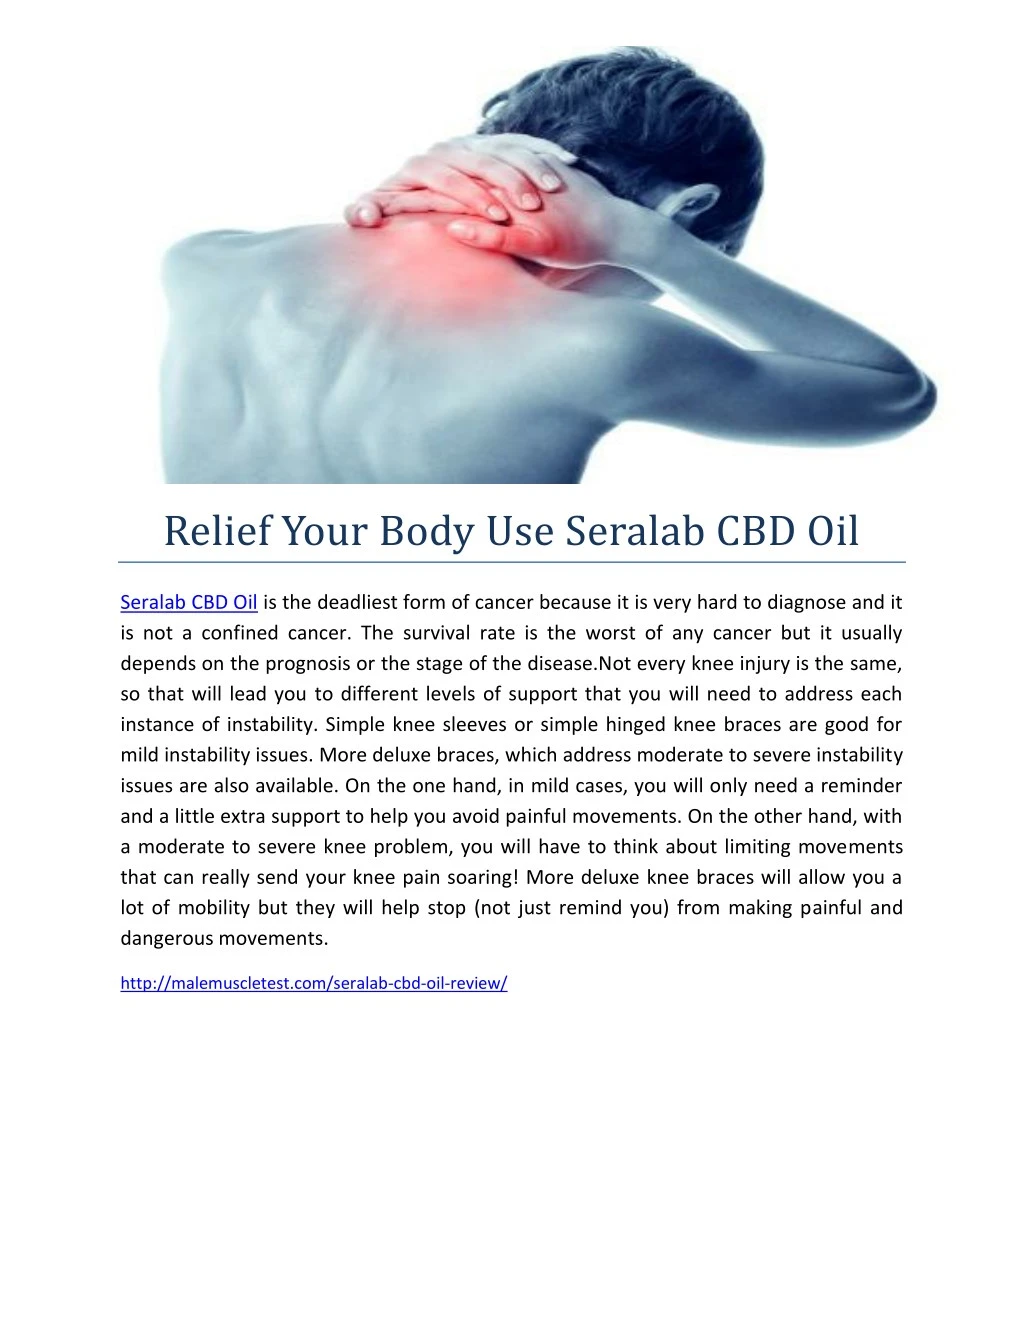 relief your body use seralab cbd oil